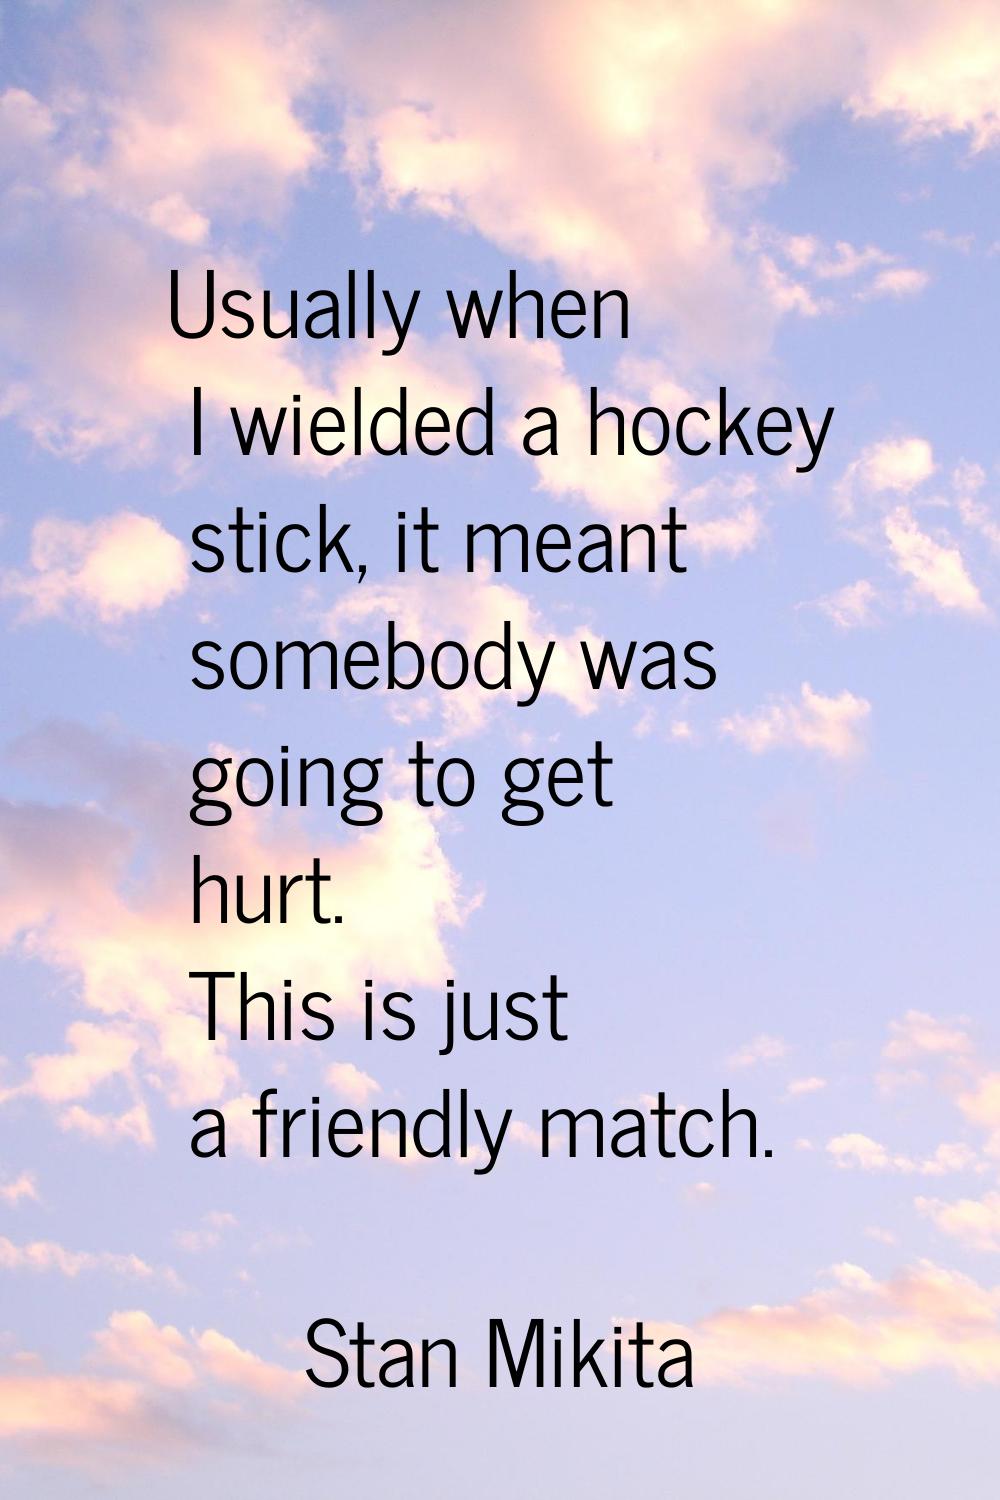 Usually when I wielded a hockey stick, it meant somebody was going to get hurt. This is just a frie